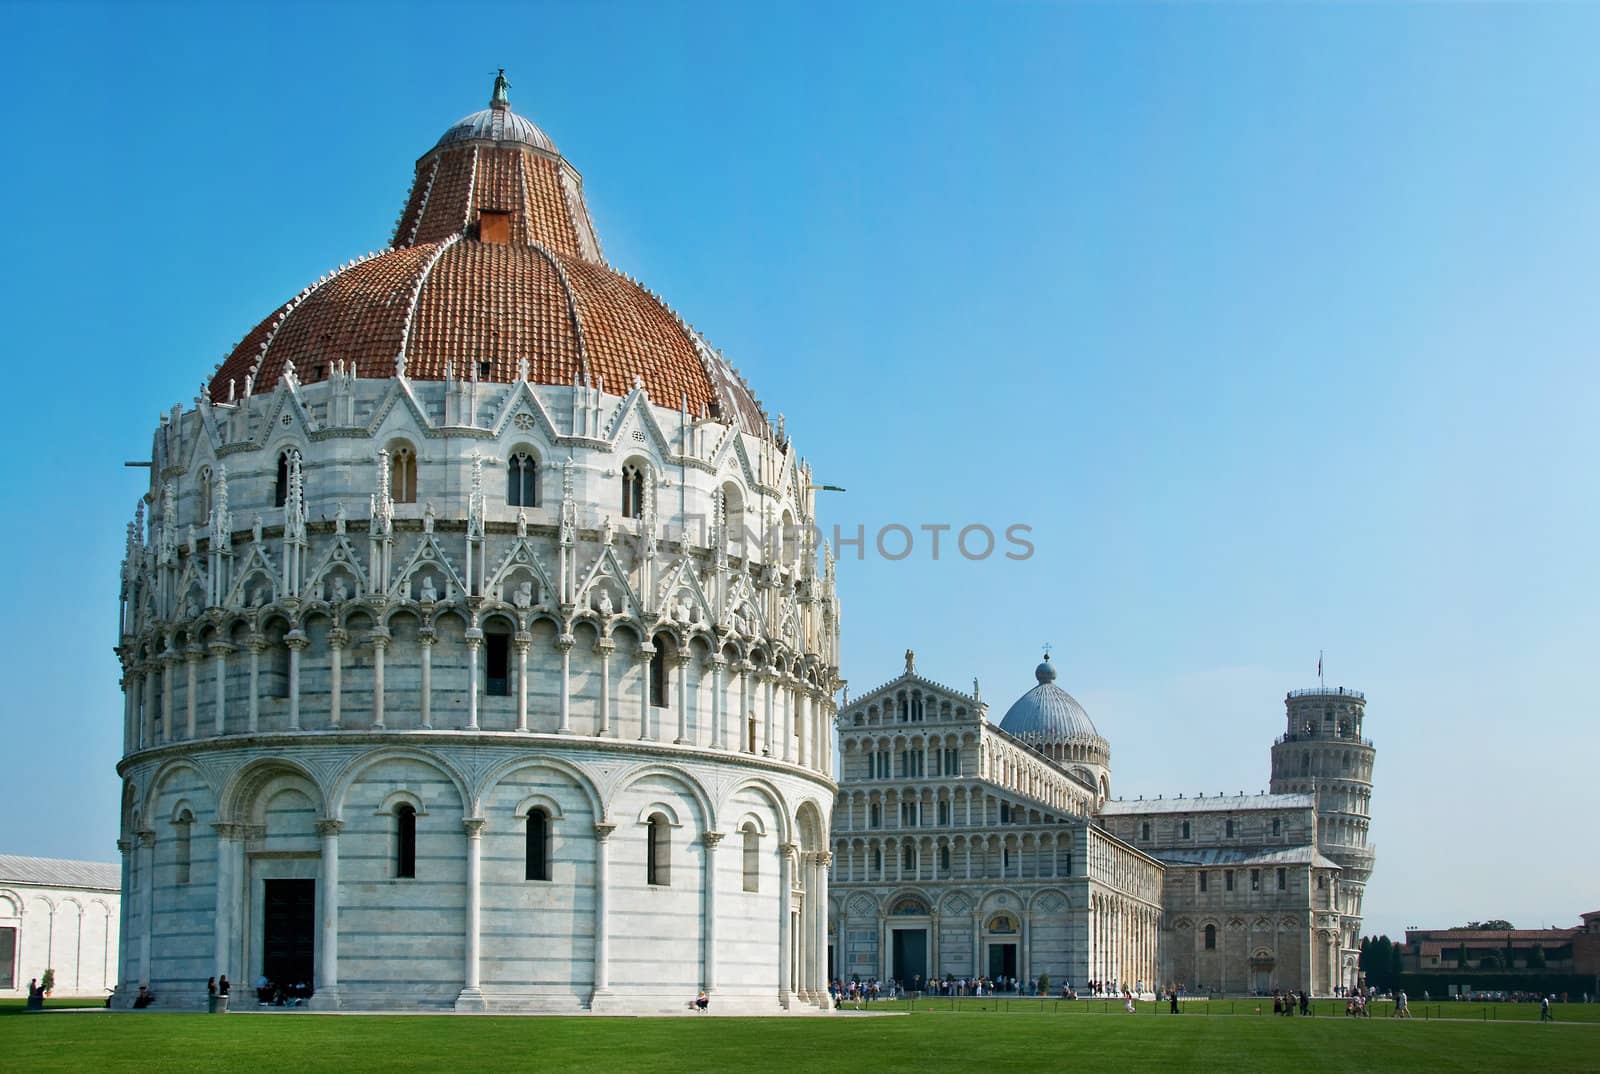 Baptistry, Pisa, Italy, with the Cathedral and Leaning Tower. Square photo with the famous leaning tower of Pisa.